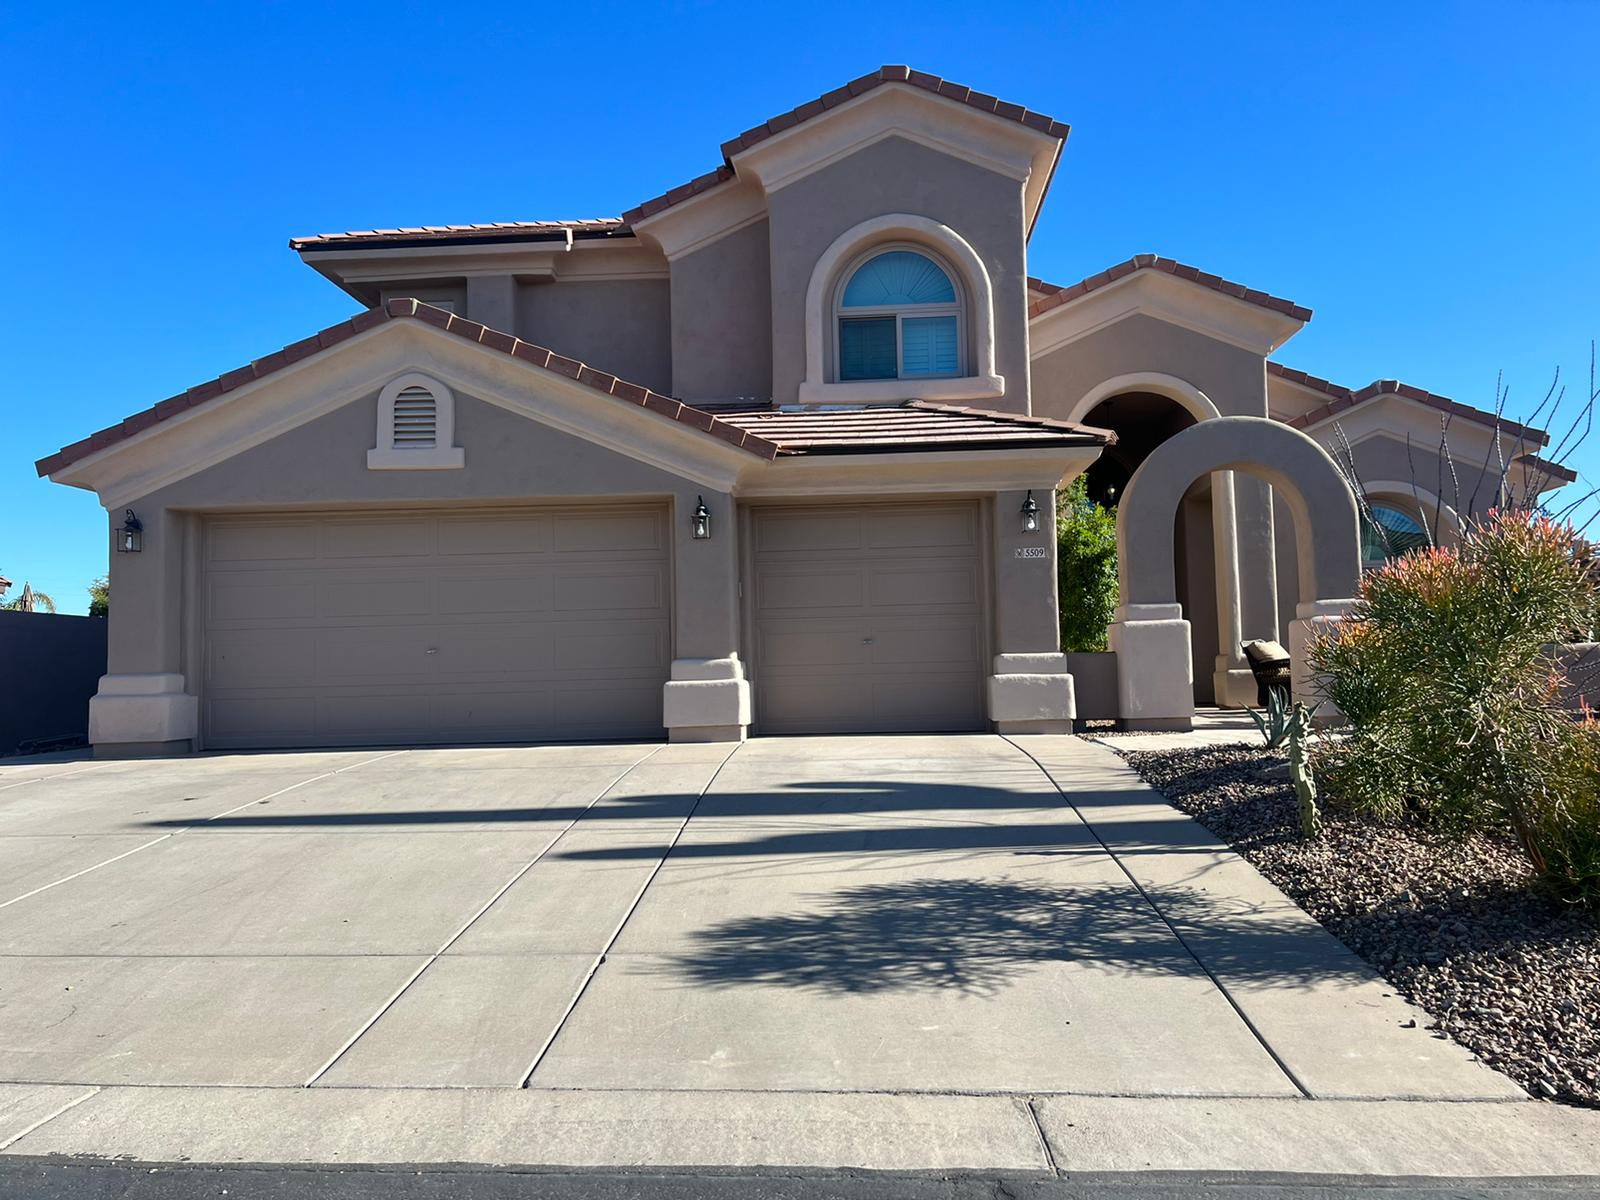 A serene Phoenix neighborhood with a freshly installed Behmer tile roof, epitomizing the blend of aesthetics and functionality in roofing solutions.